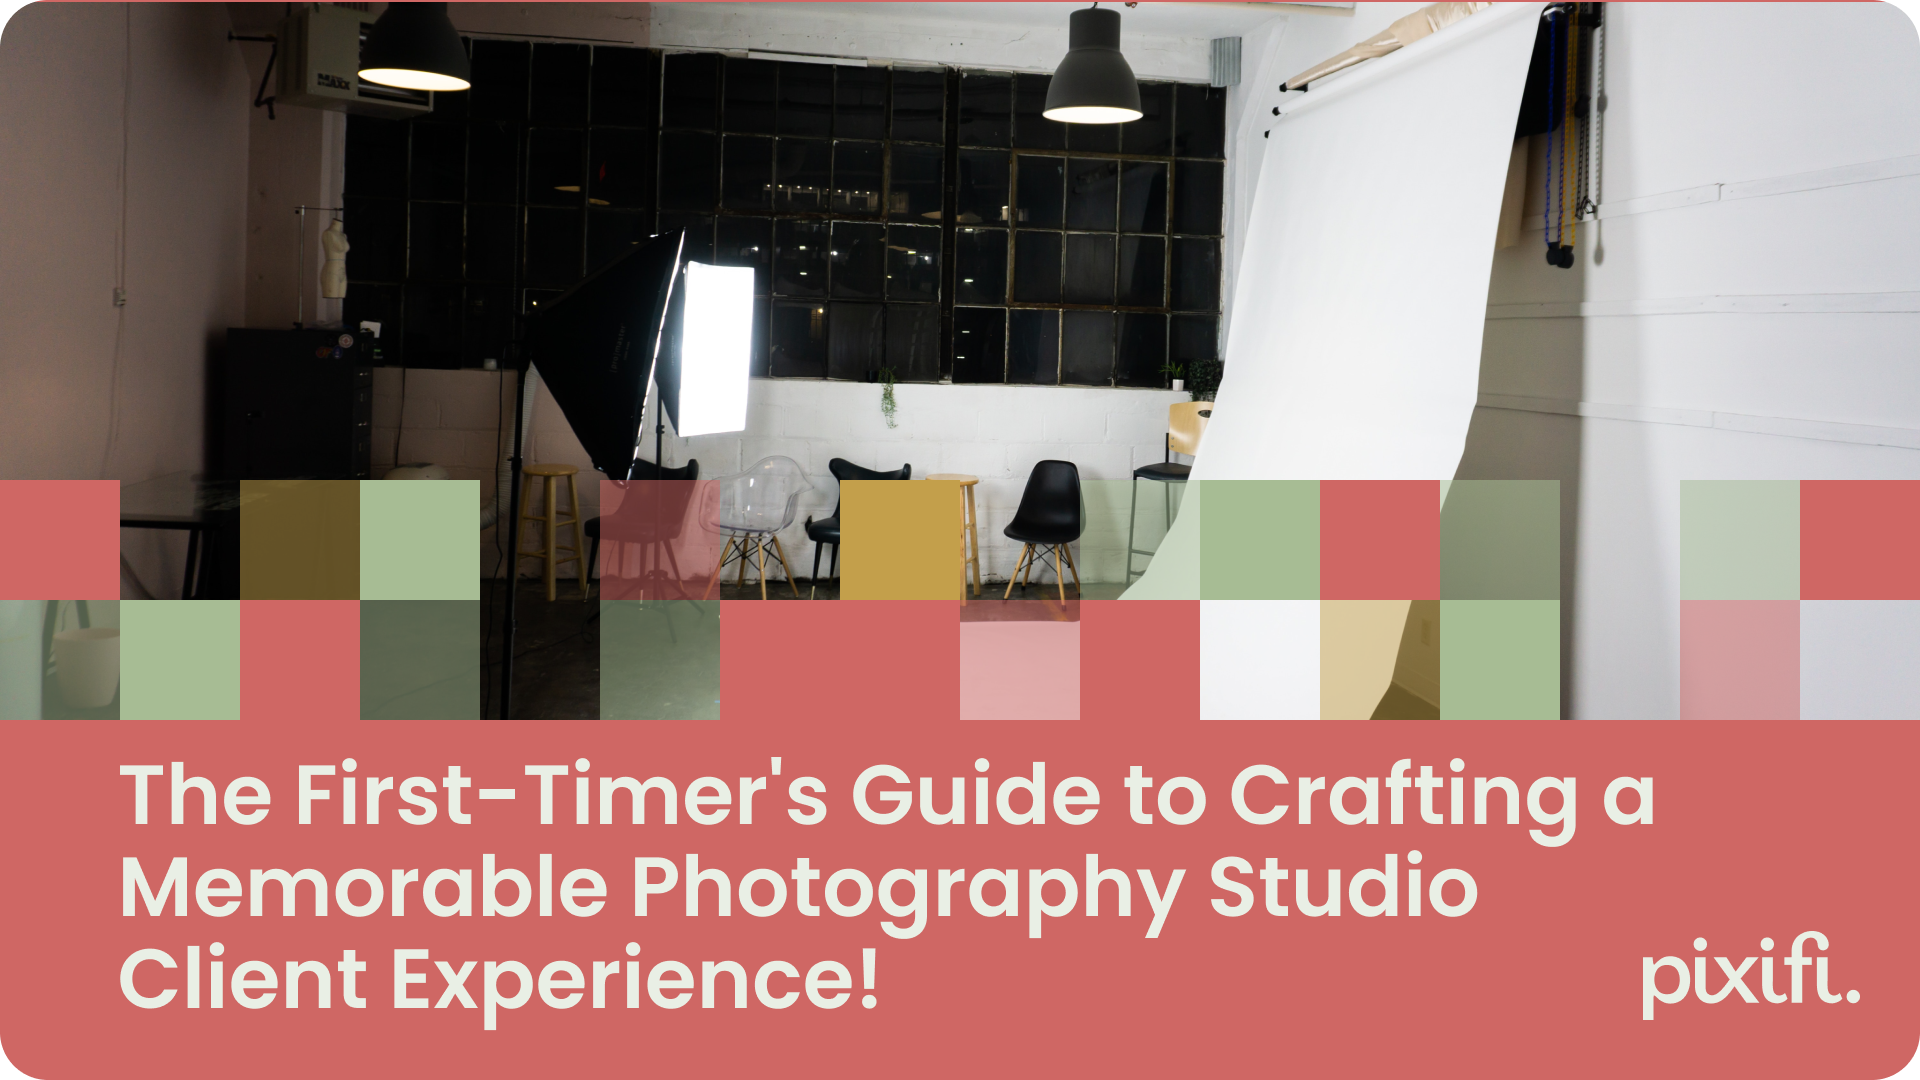 The First-Timer's Guide to Crafting a Memorable Photography Studio Client Experience!